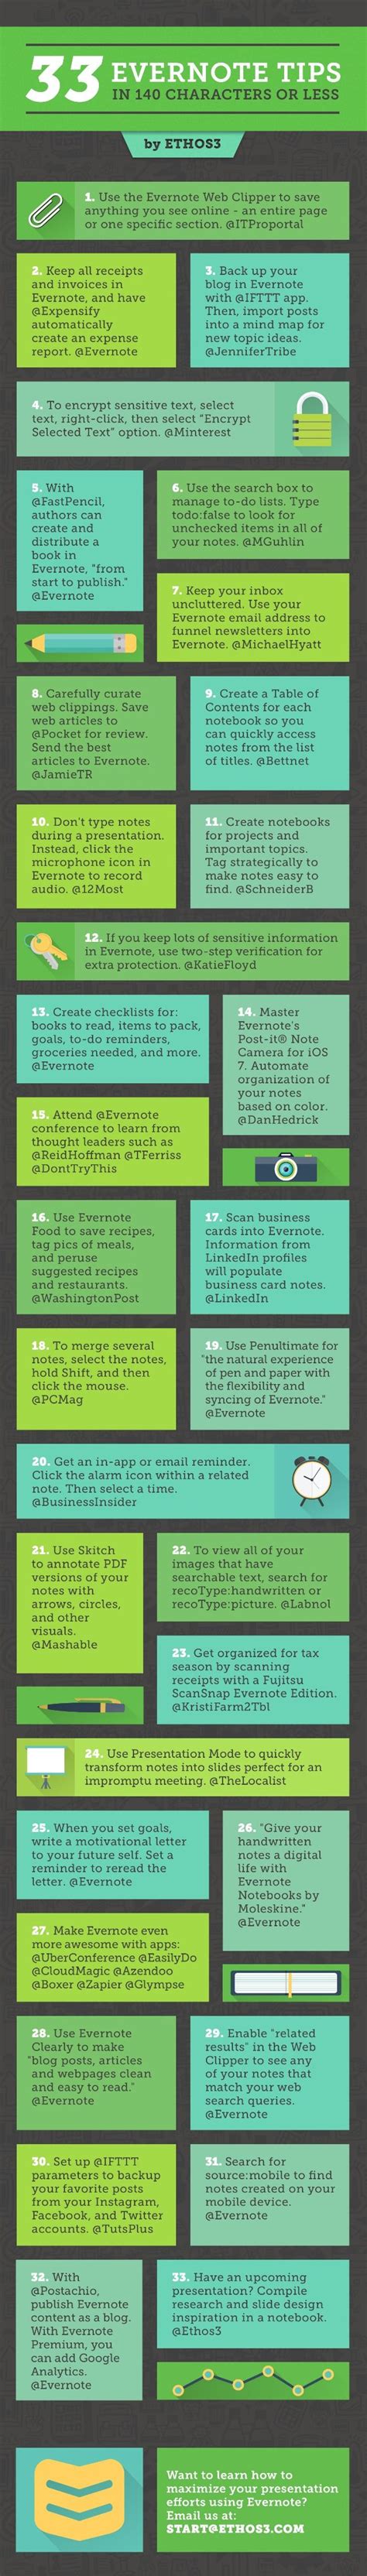 33 Evernote Tips In 140 Characters Or Less By Ethos3